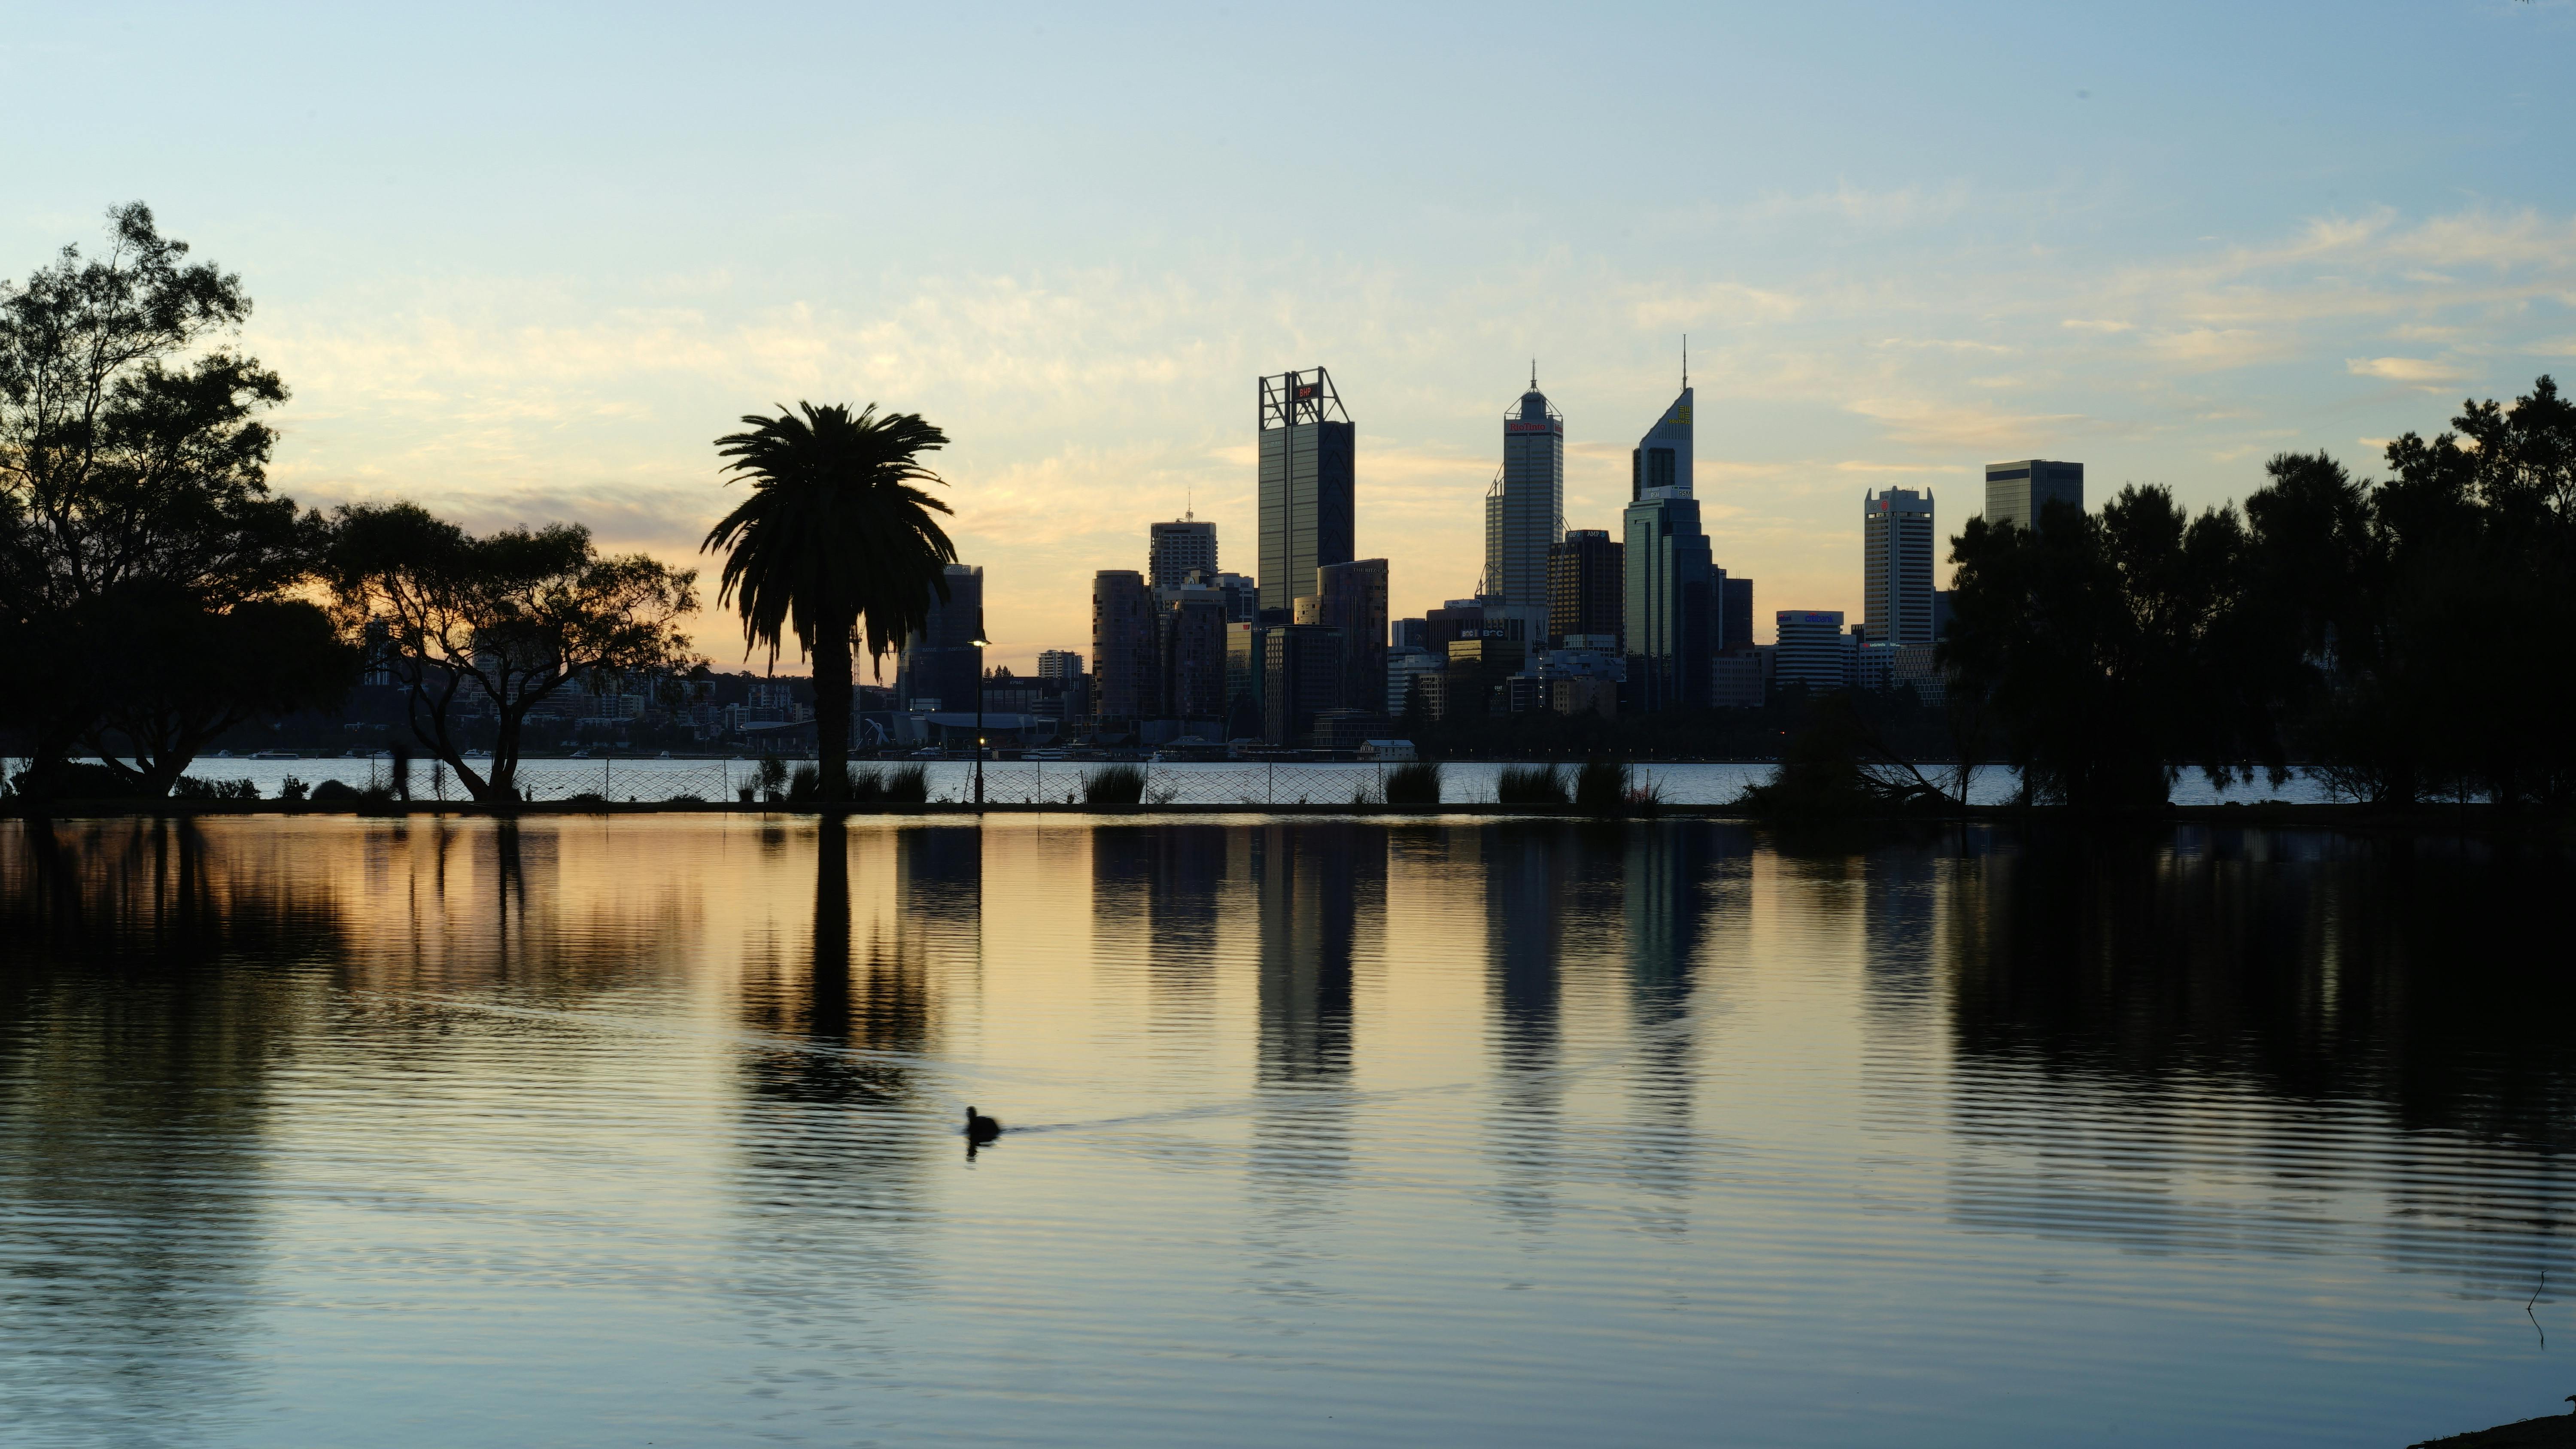 Perth emerges as Australia's most affordable capital city for home buyers